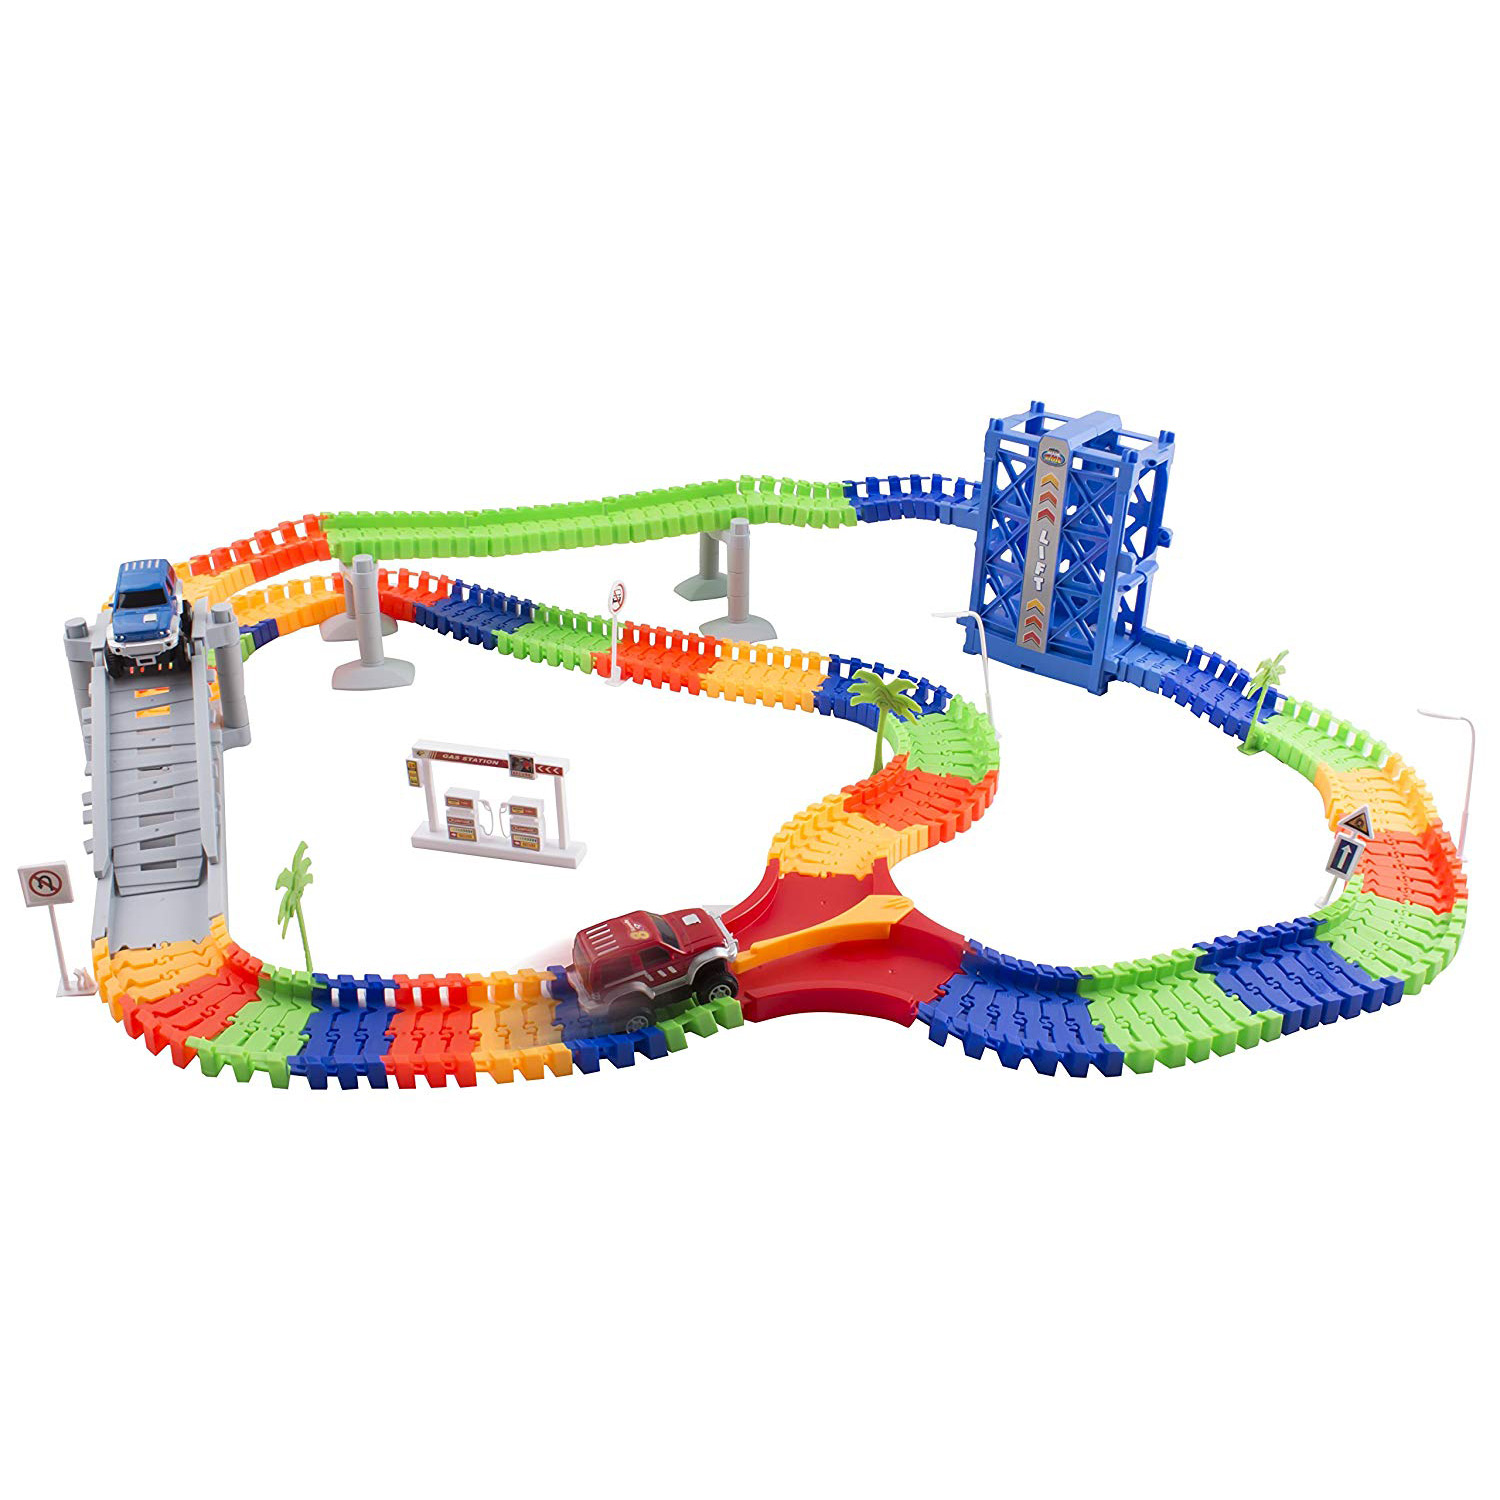 Race Car Track Set Toy Educational Twisted Flexible Building Tracks 240 Pieces Racetrack 2 Cars with Lifter Bridge Trees Gas Station for Children Ages 3 4 5 6 Year old Kids Toys Unisex Boys And Girls 1109